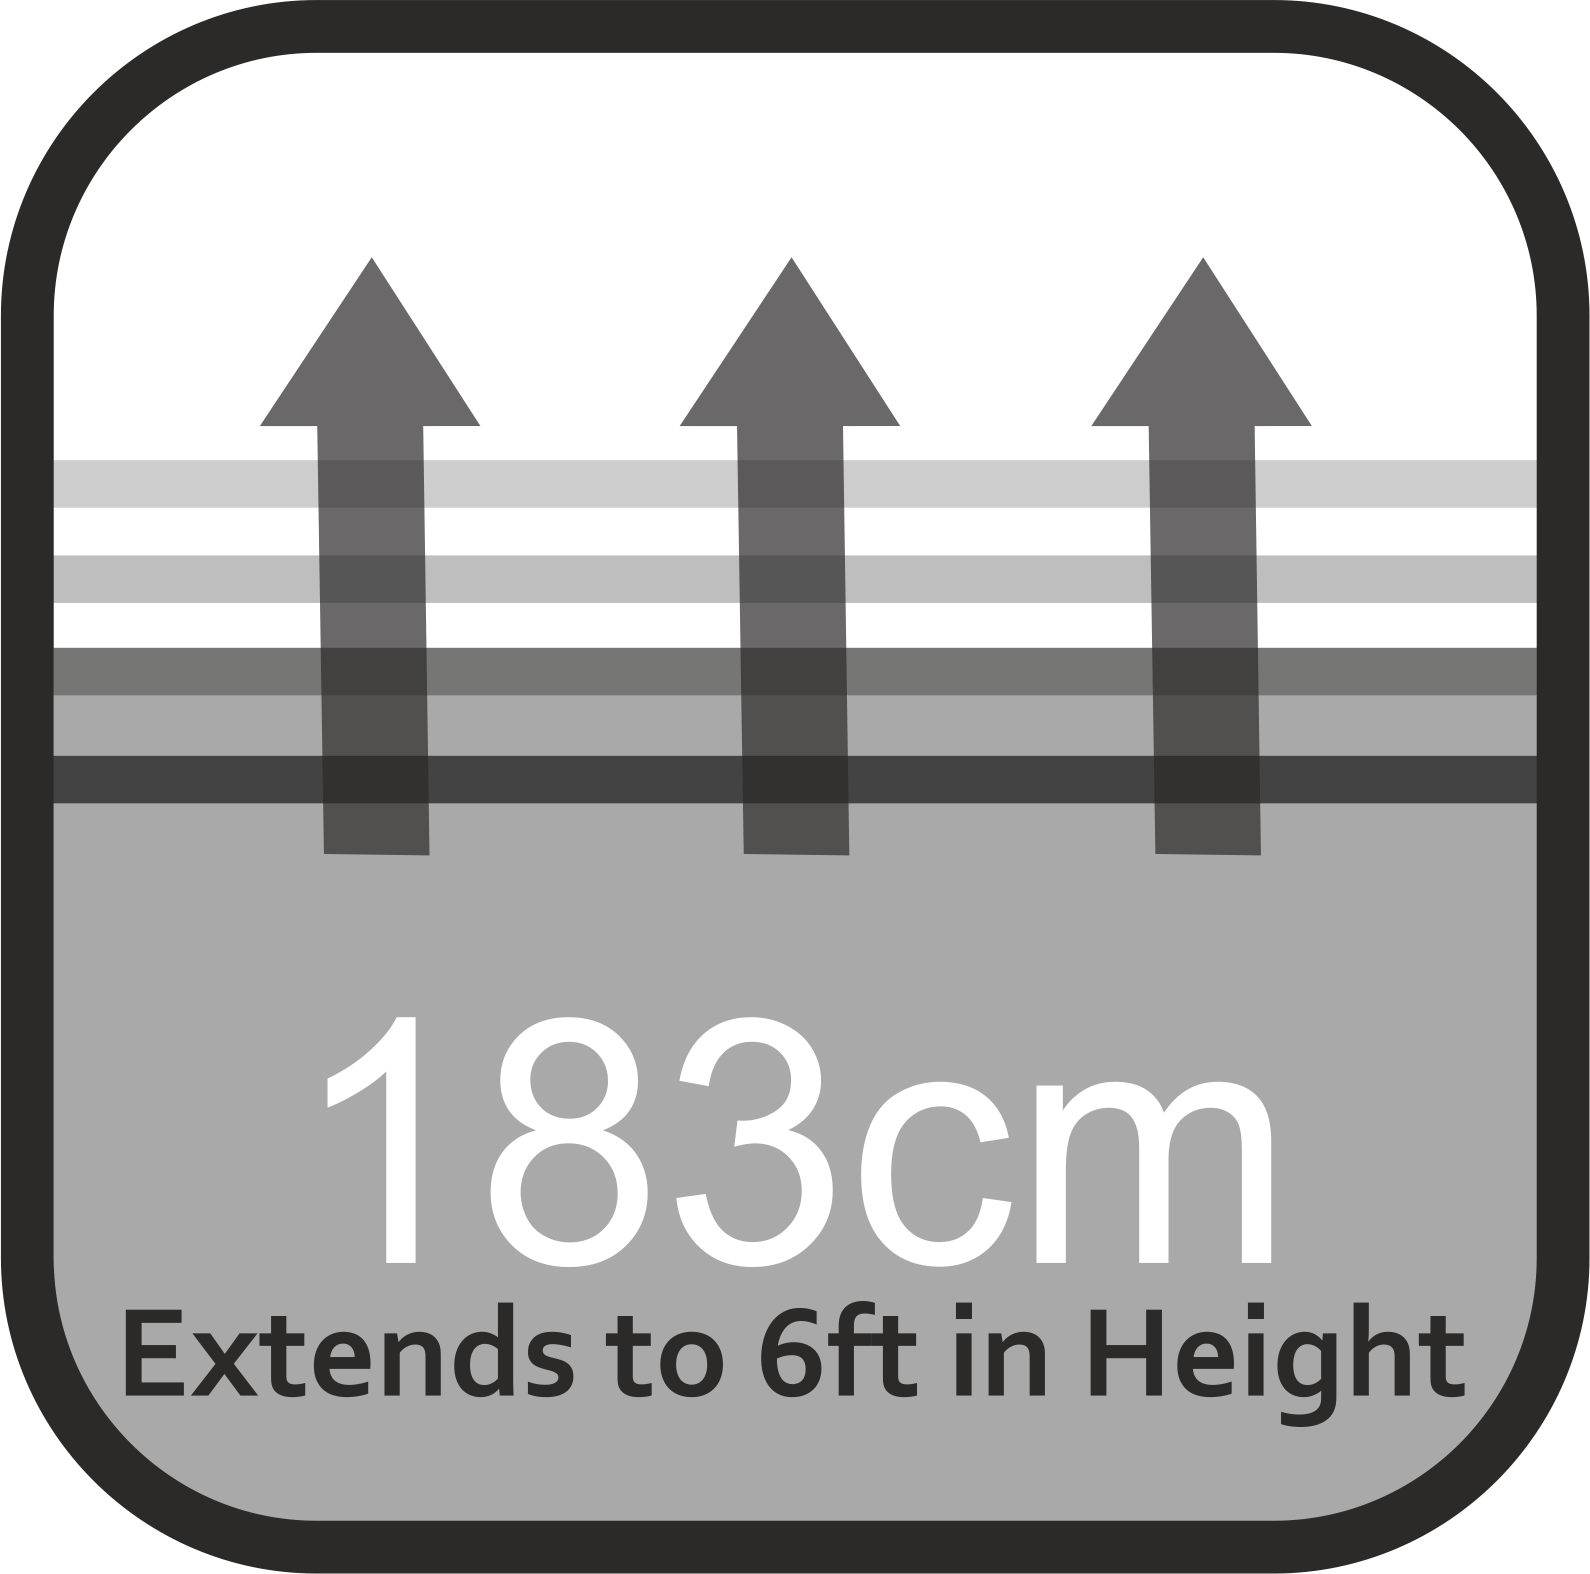 Extends up to 183cm in height icon label